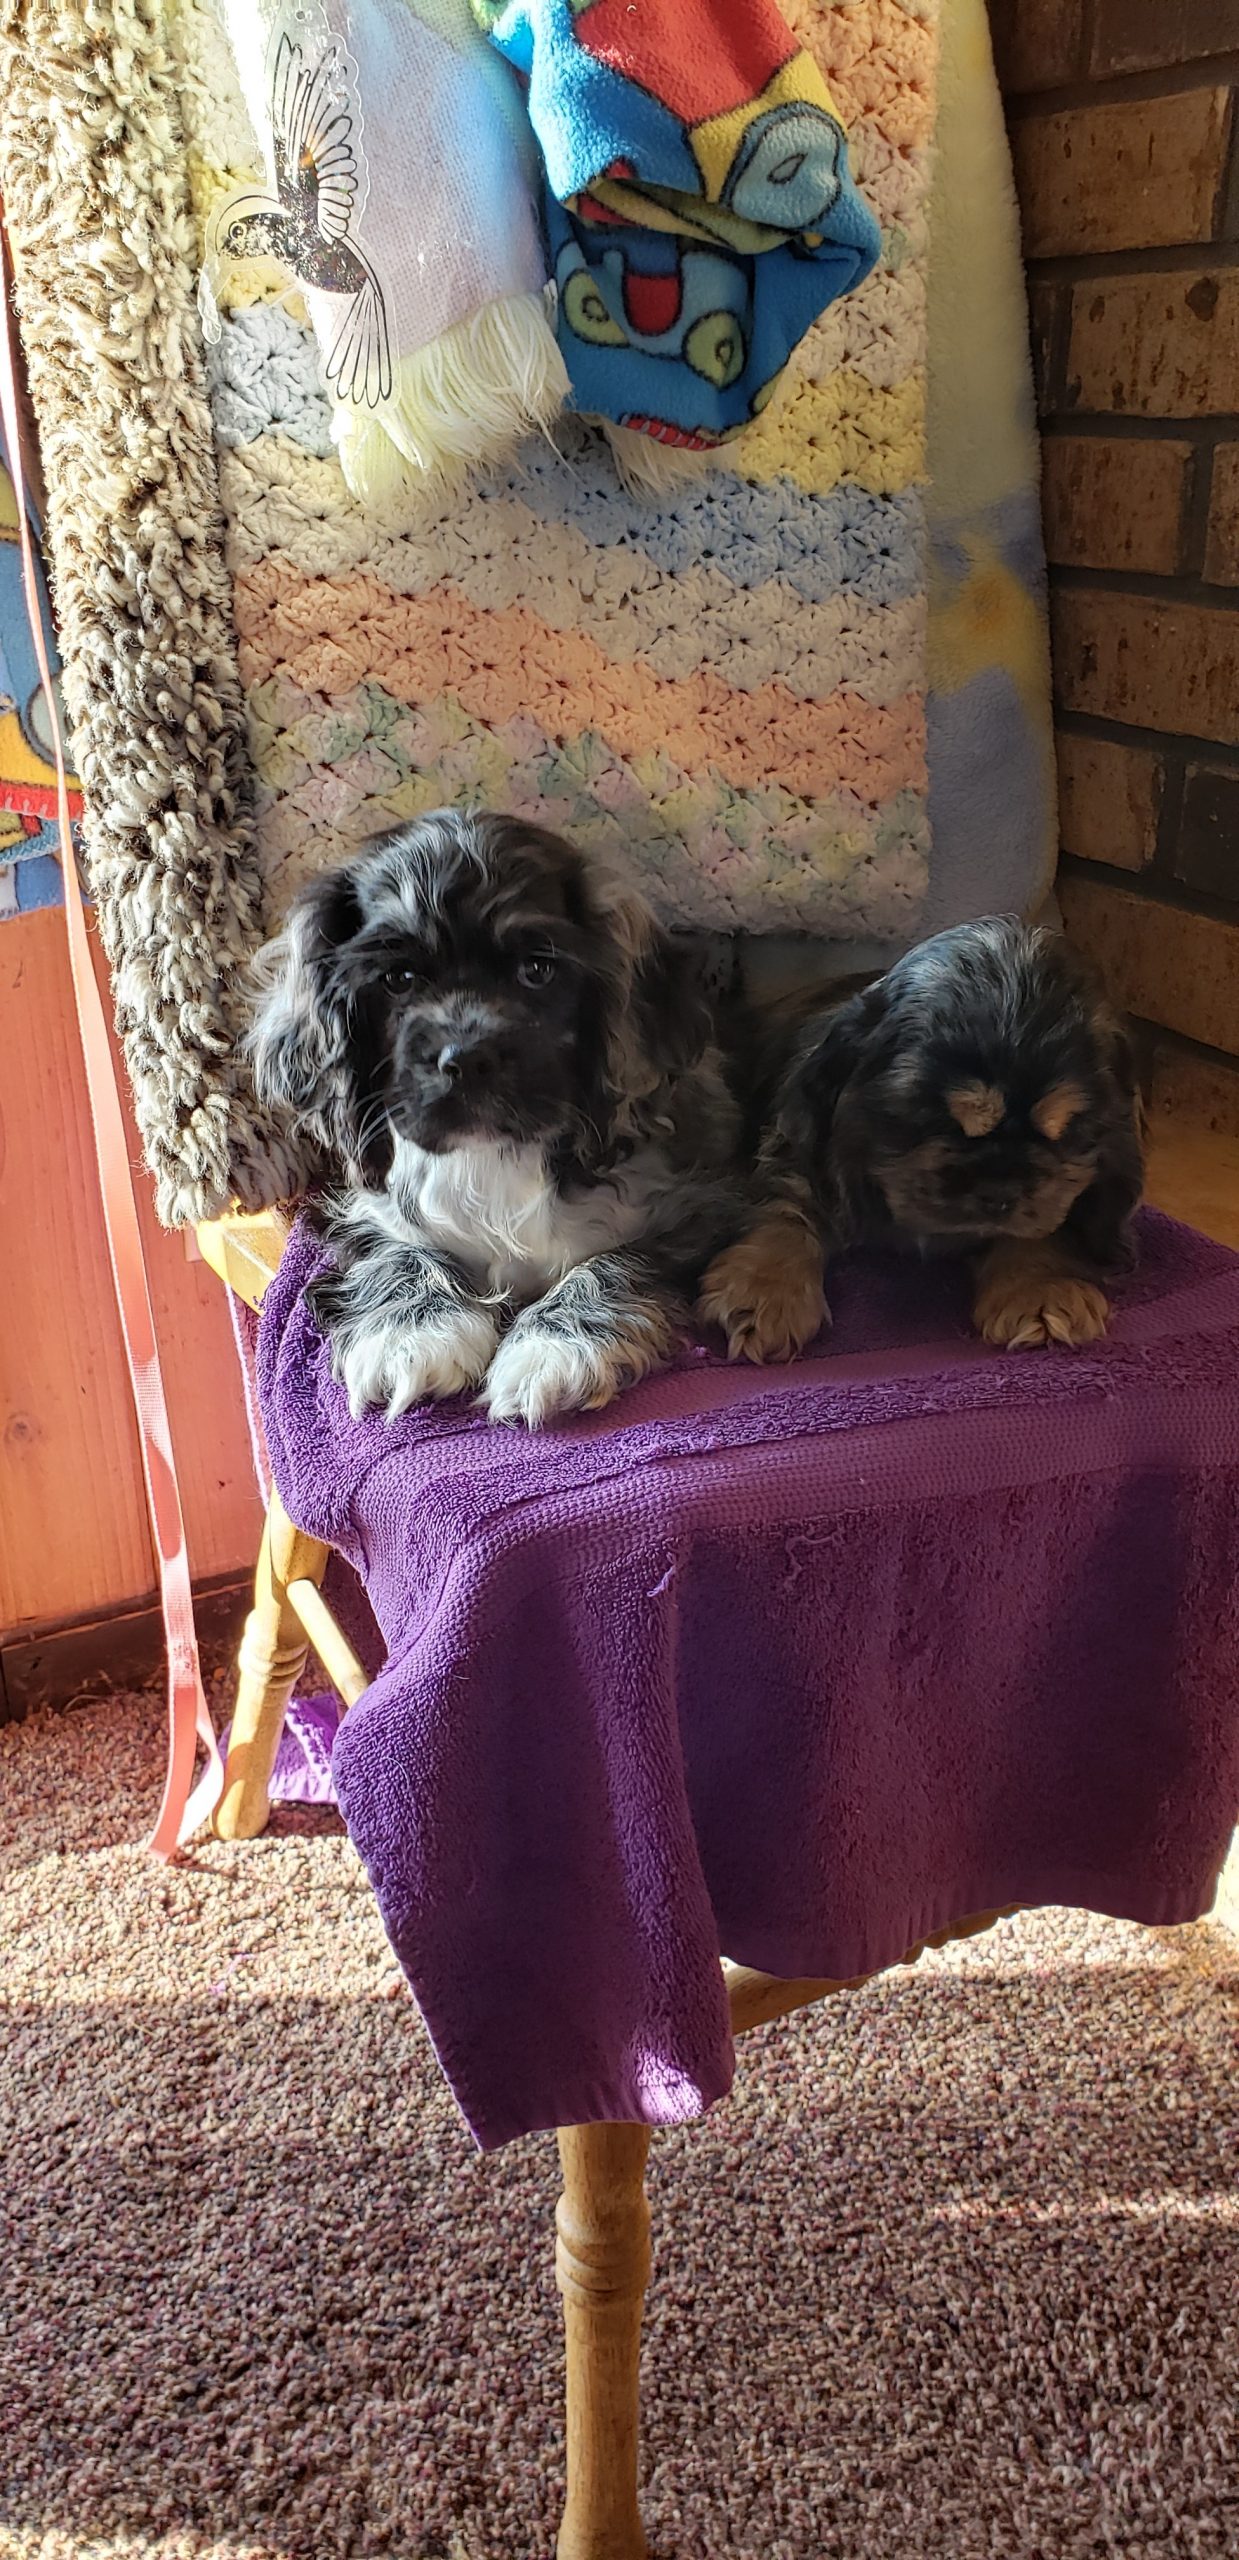 Parti Color Cocker Spaniels - Puppies For Sale at Penny Lane Cocker Spaniels